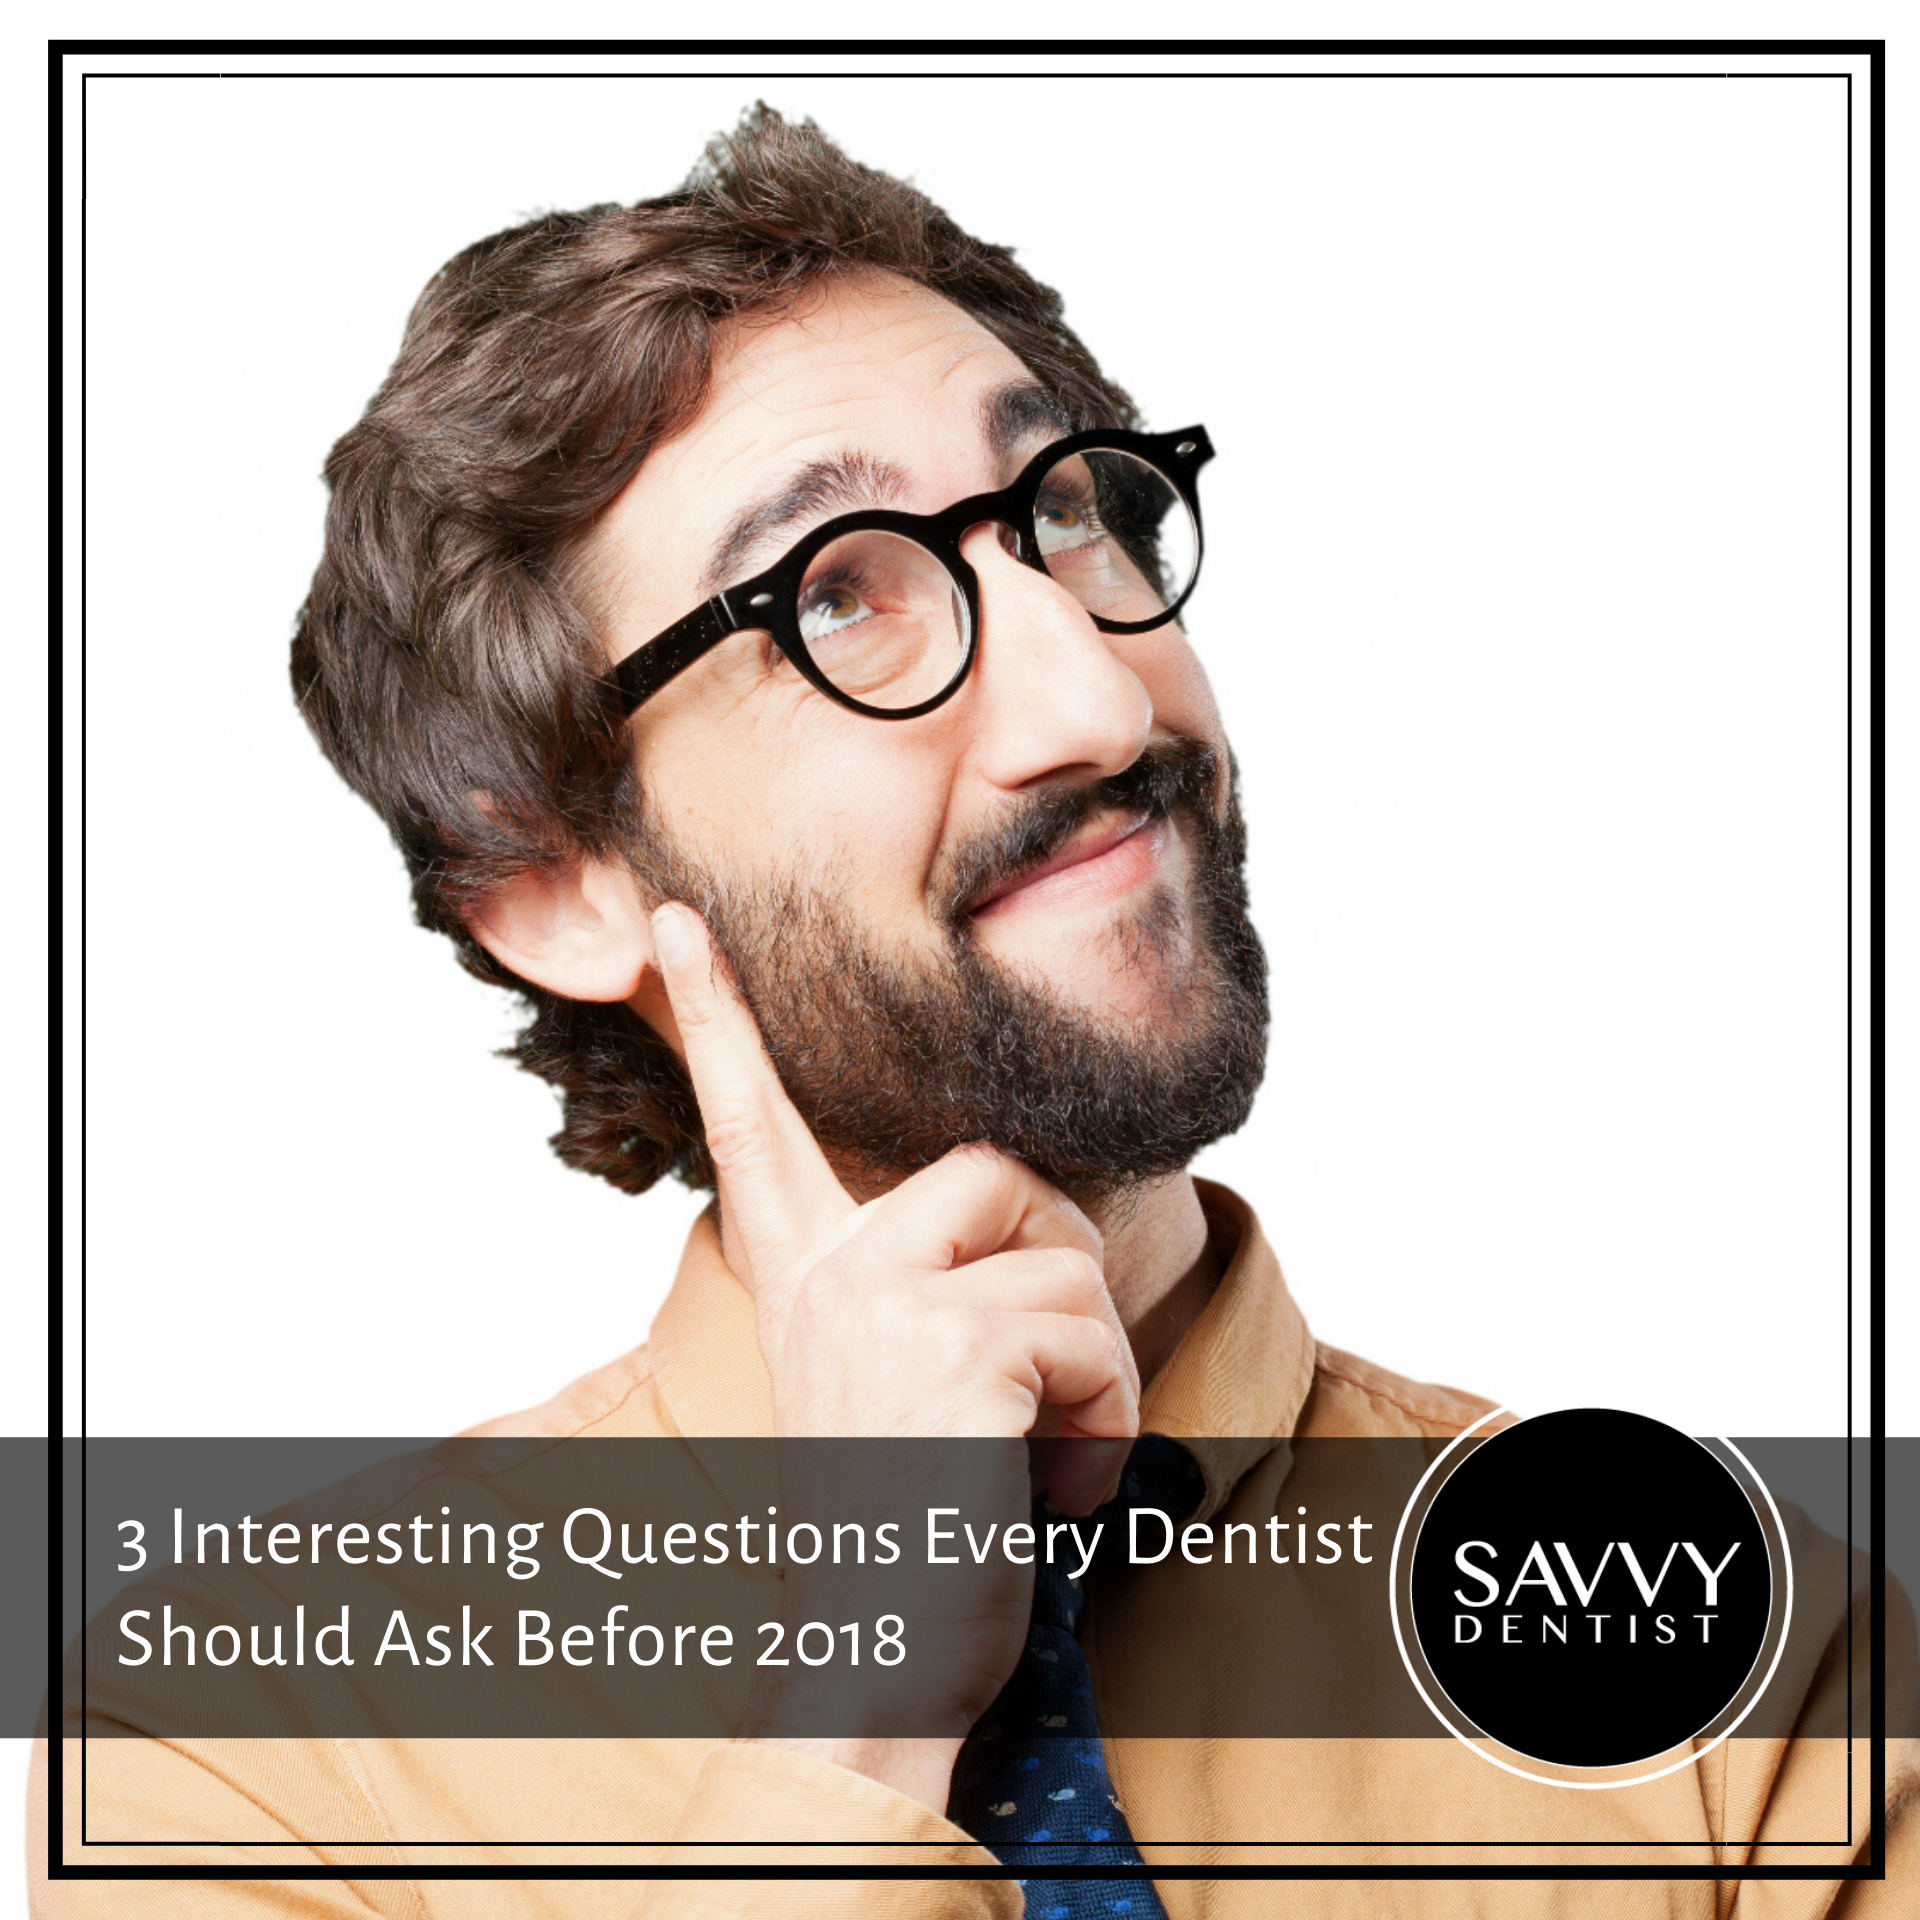 3 Interesting Questions Every Dentist Should Ask Before 2018